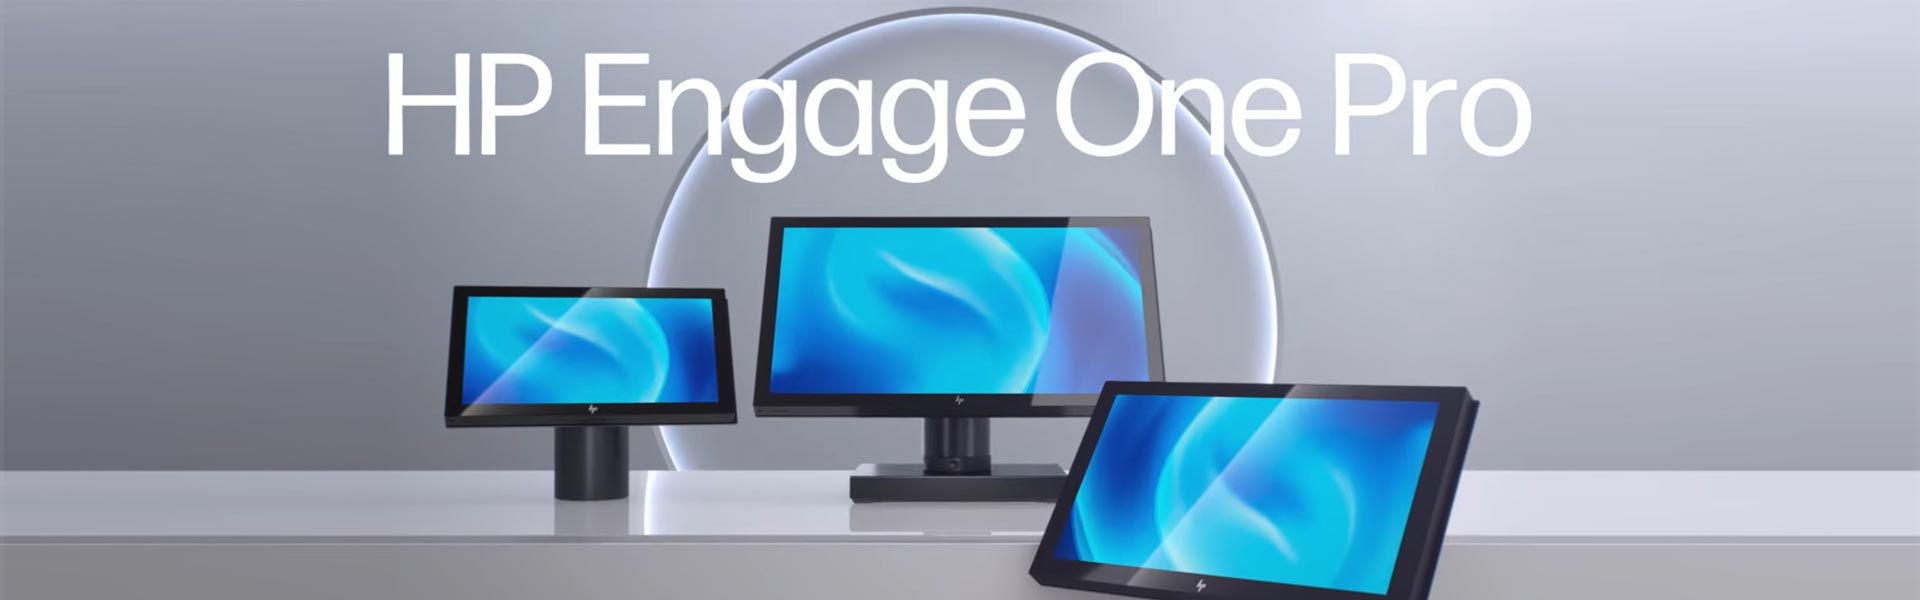 HP Engage One Pro